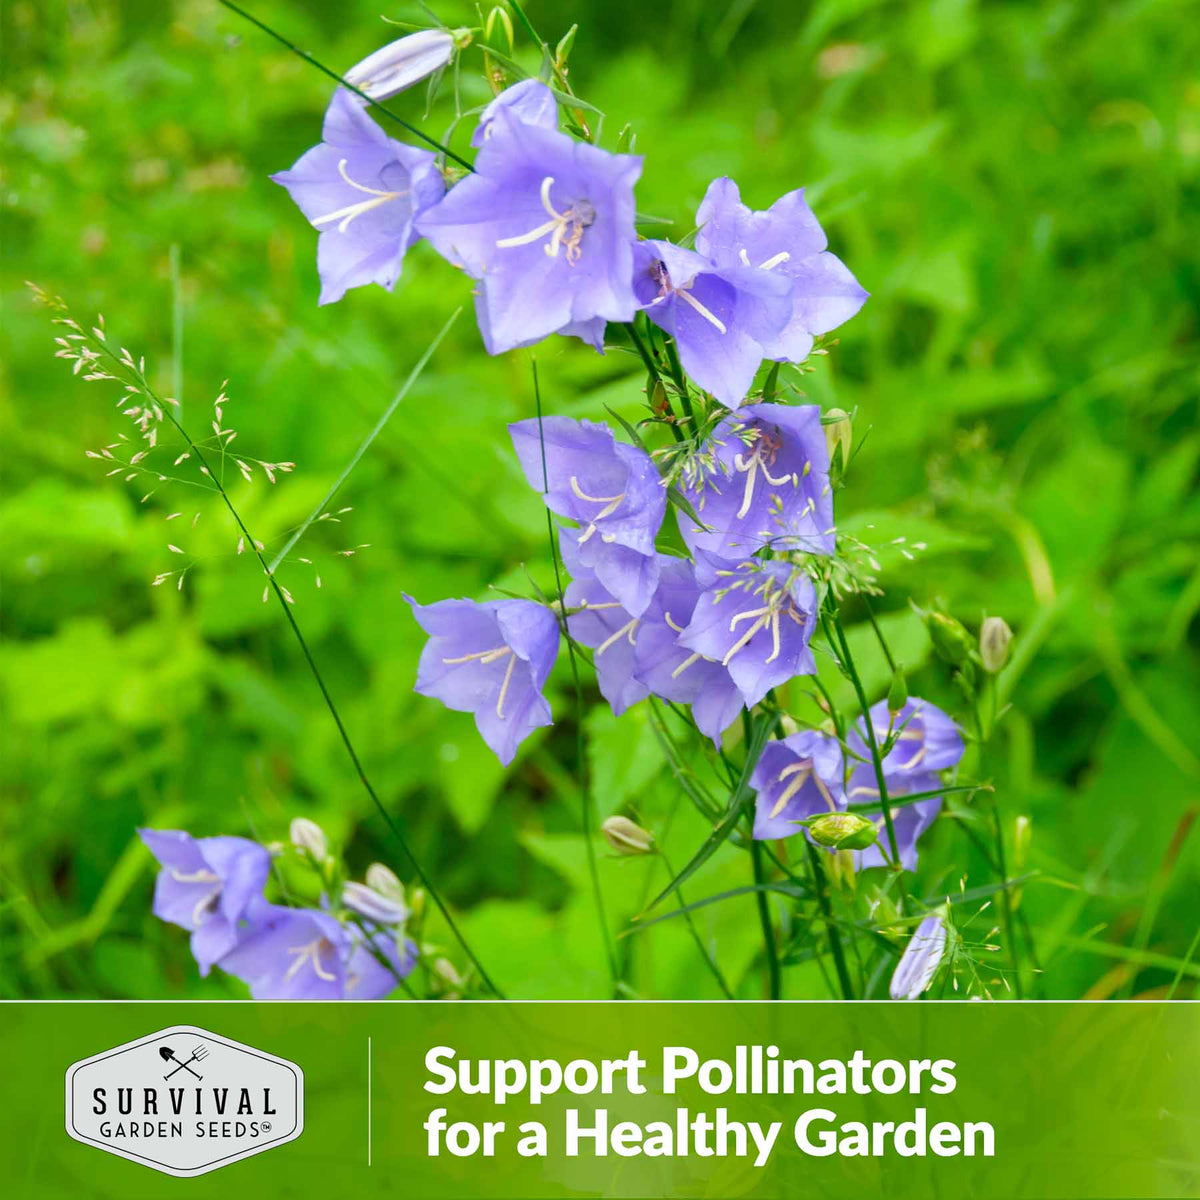 Support Pollinators for a healthy garden